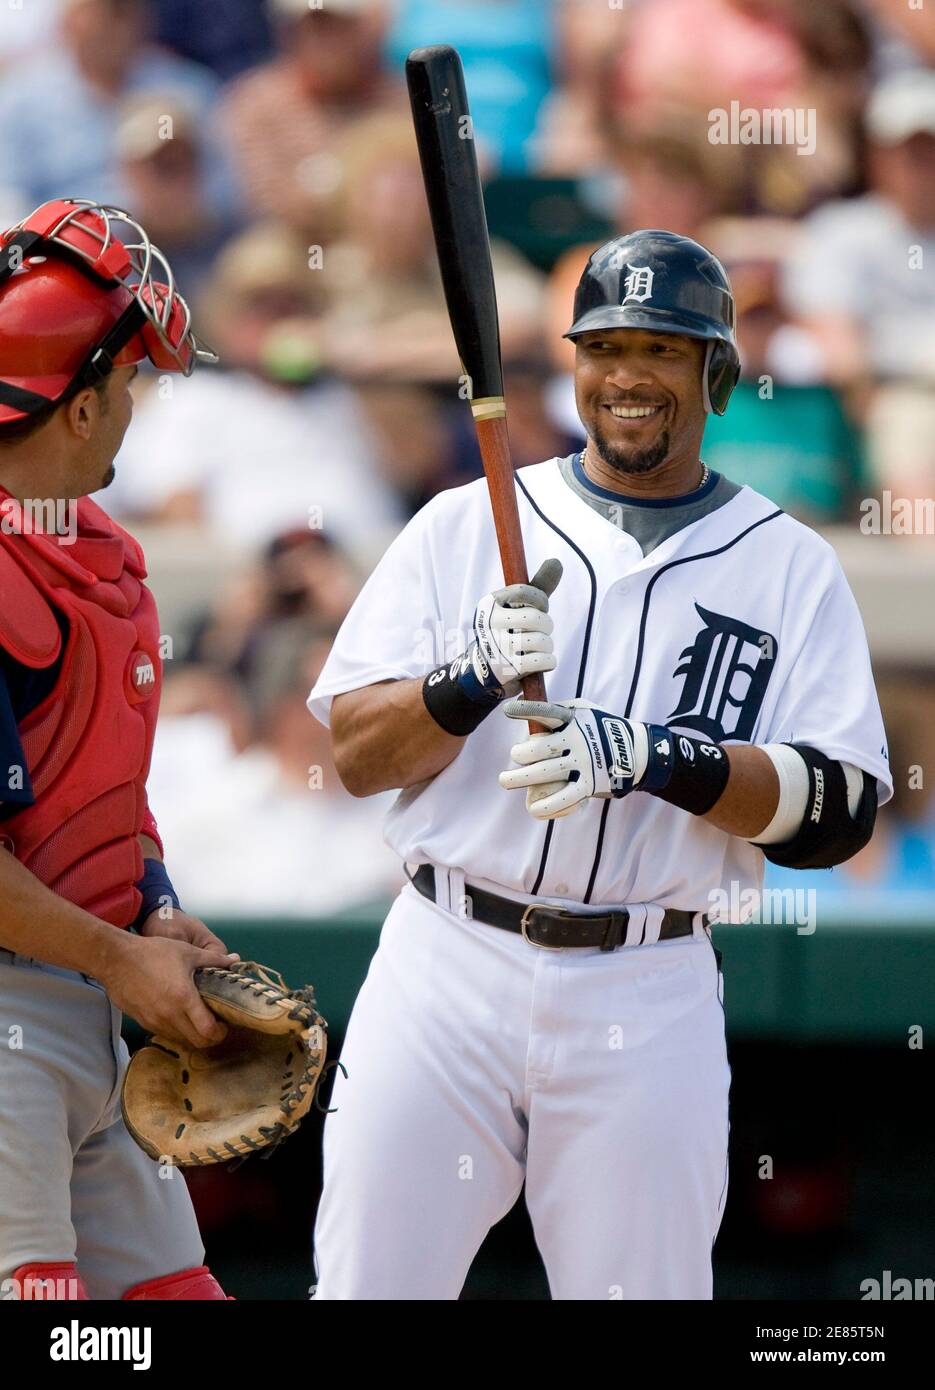 Detroit Tigers' Gary Sheffield (R) laughes with Washington Nationals catcher Wil Nieves during their spring training baseball game in Lakeland, Florida March 18, 2008.  REUTERS/Scott Audette (UNITED STATES) Stock Photo